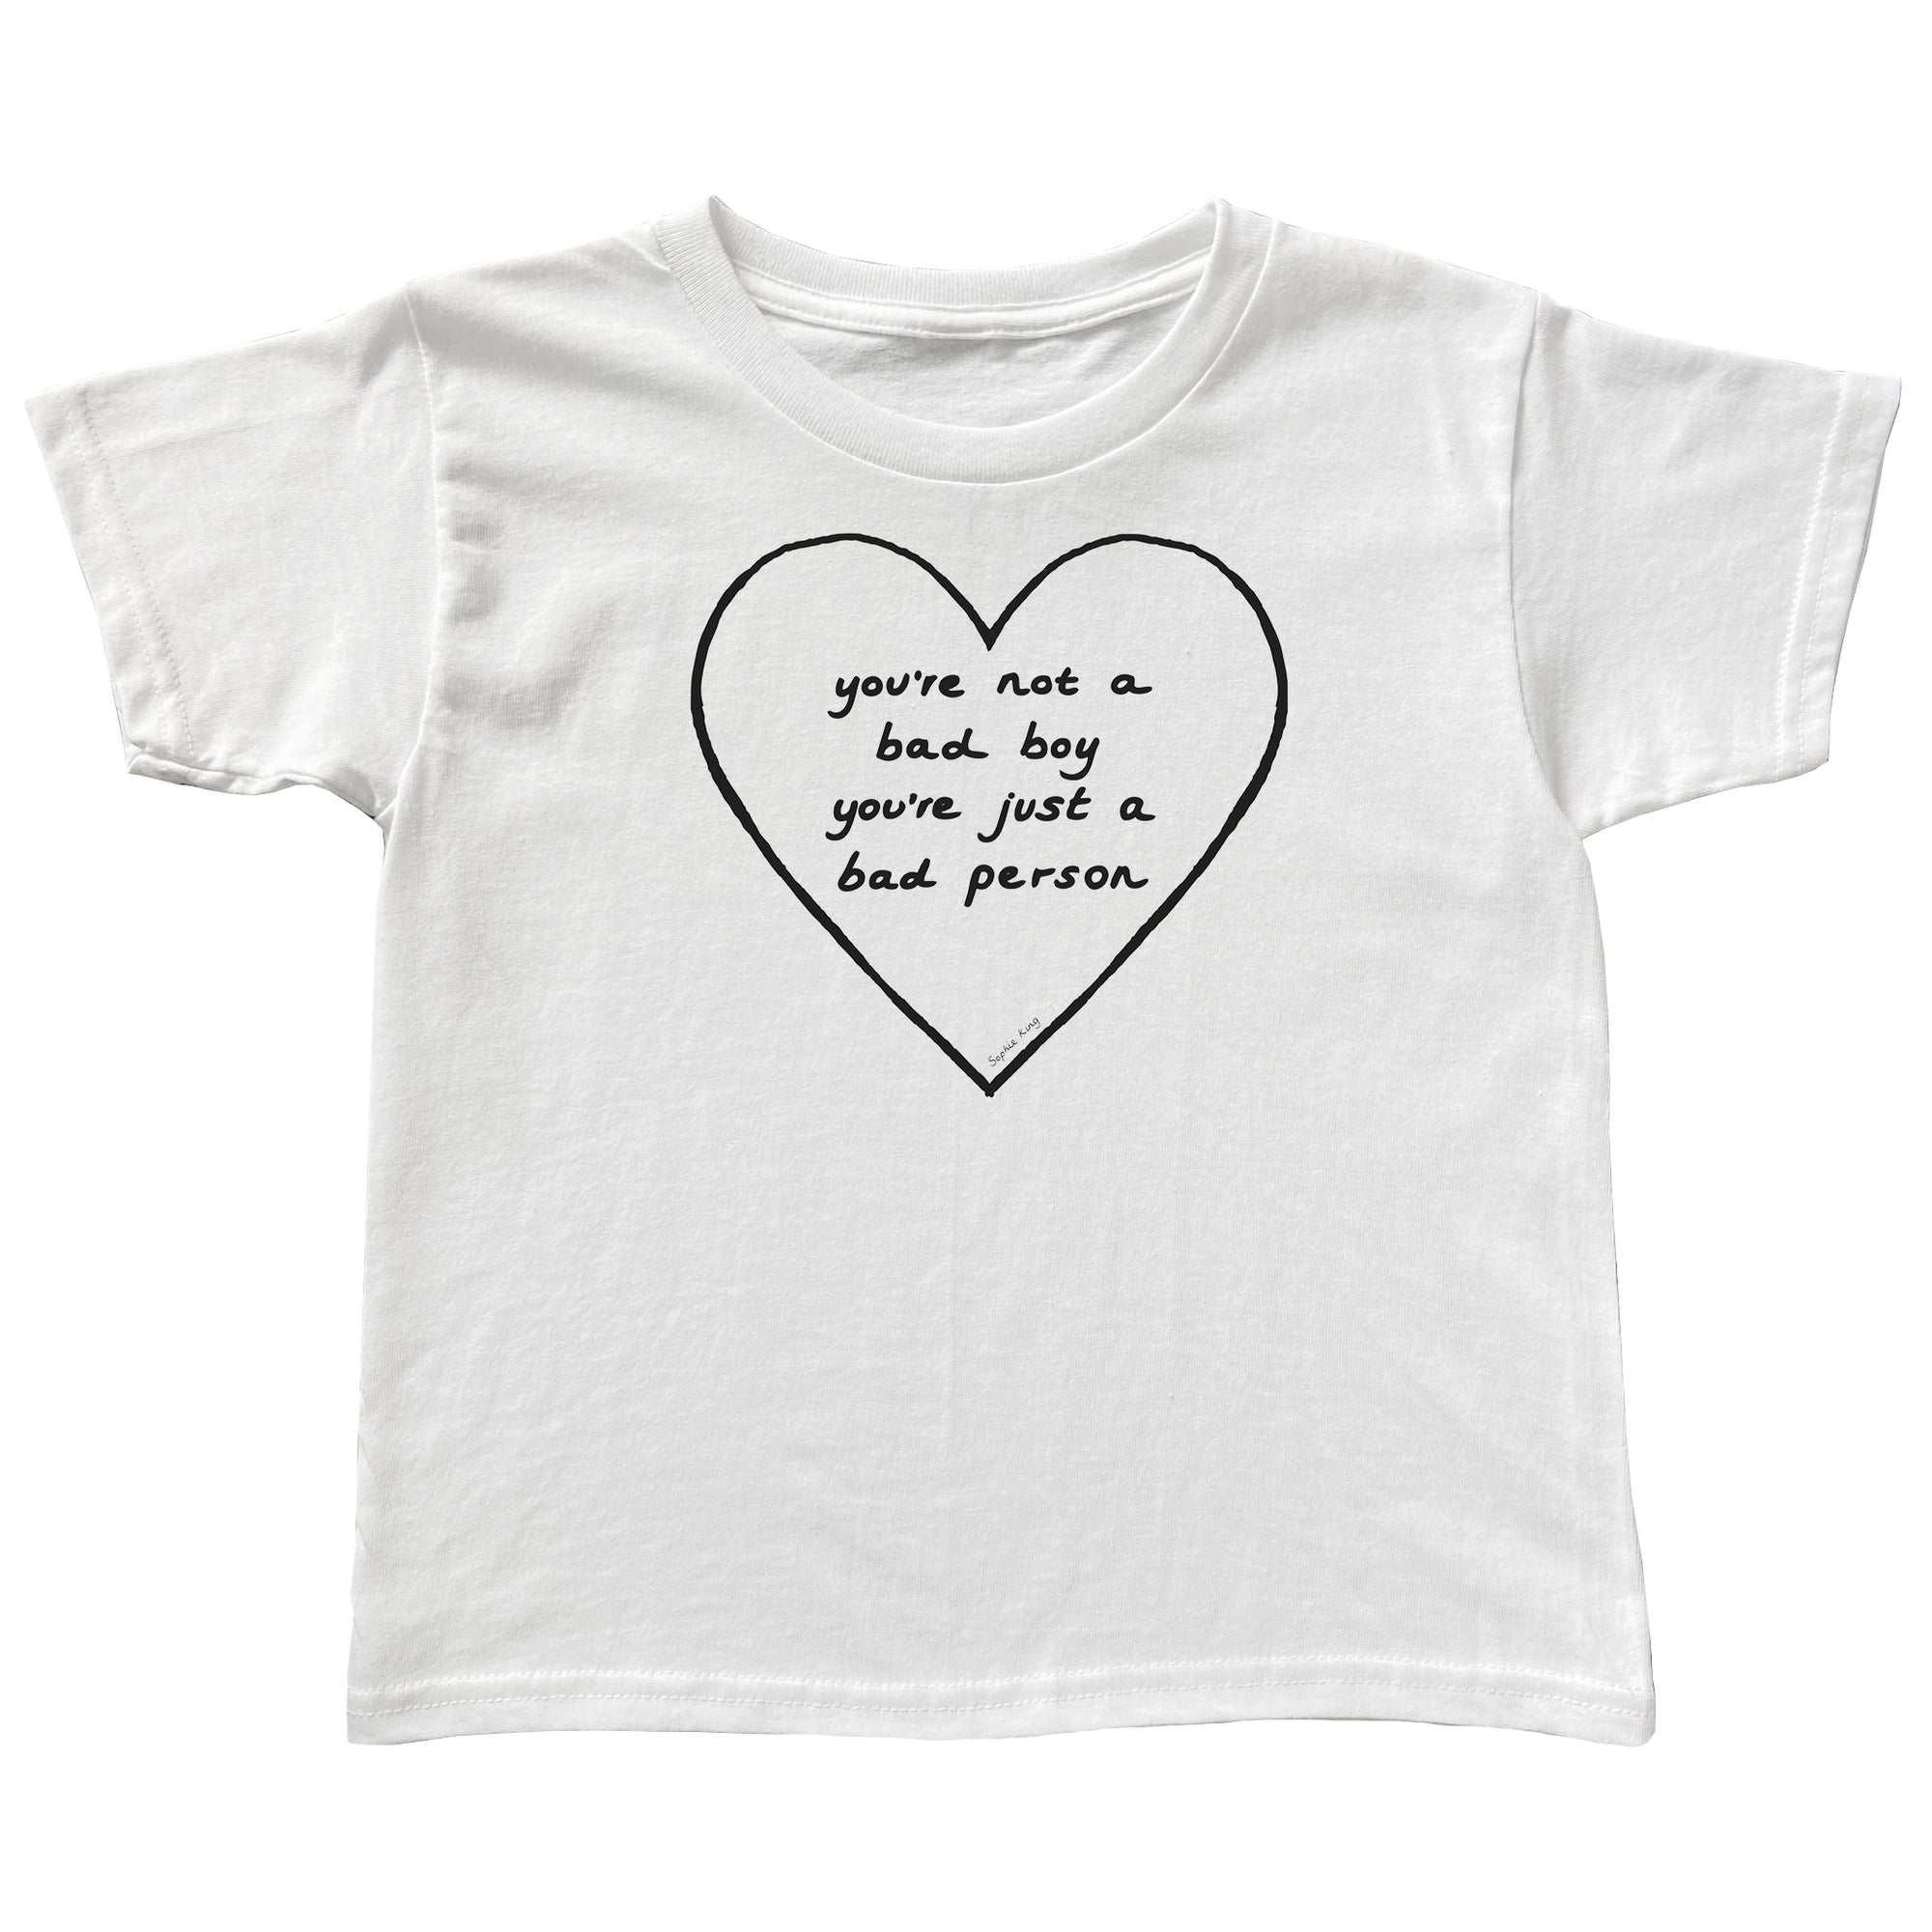 You're Not A Bad Boy You're Just A Bad Person (baby tee)